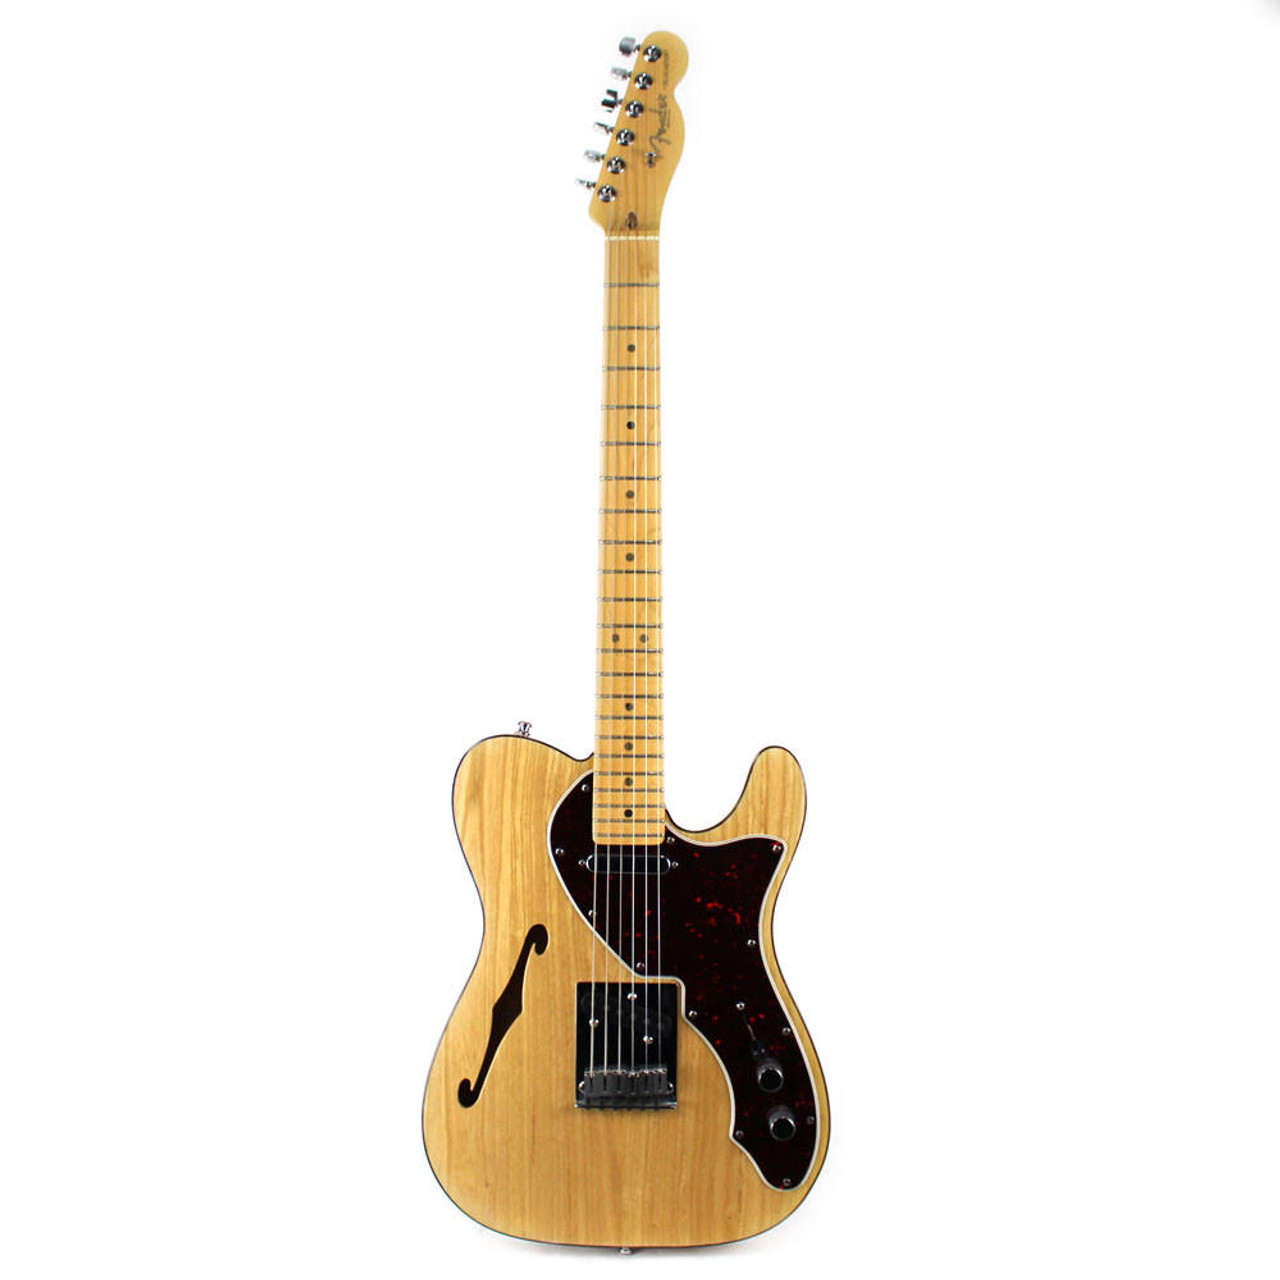 2000 USA Fender Telecaster Thinline Electric Guitar Natural Finish